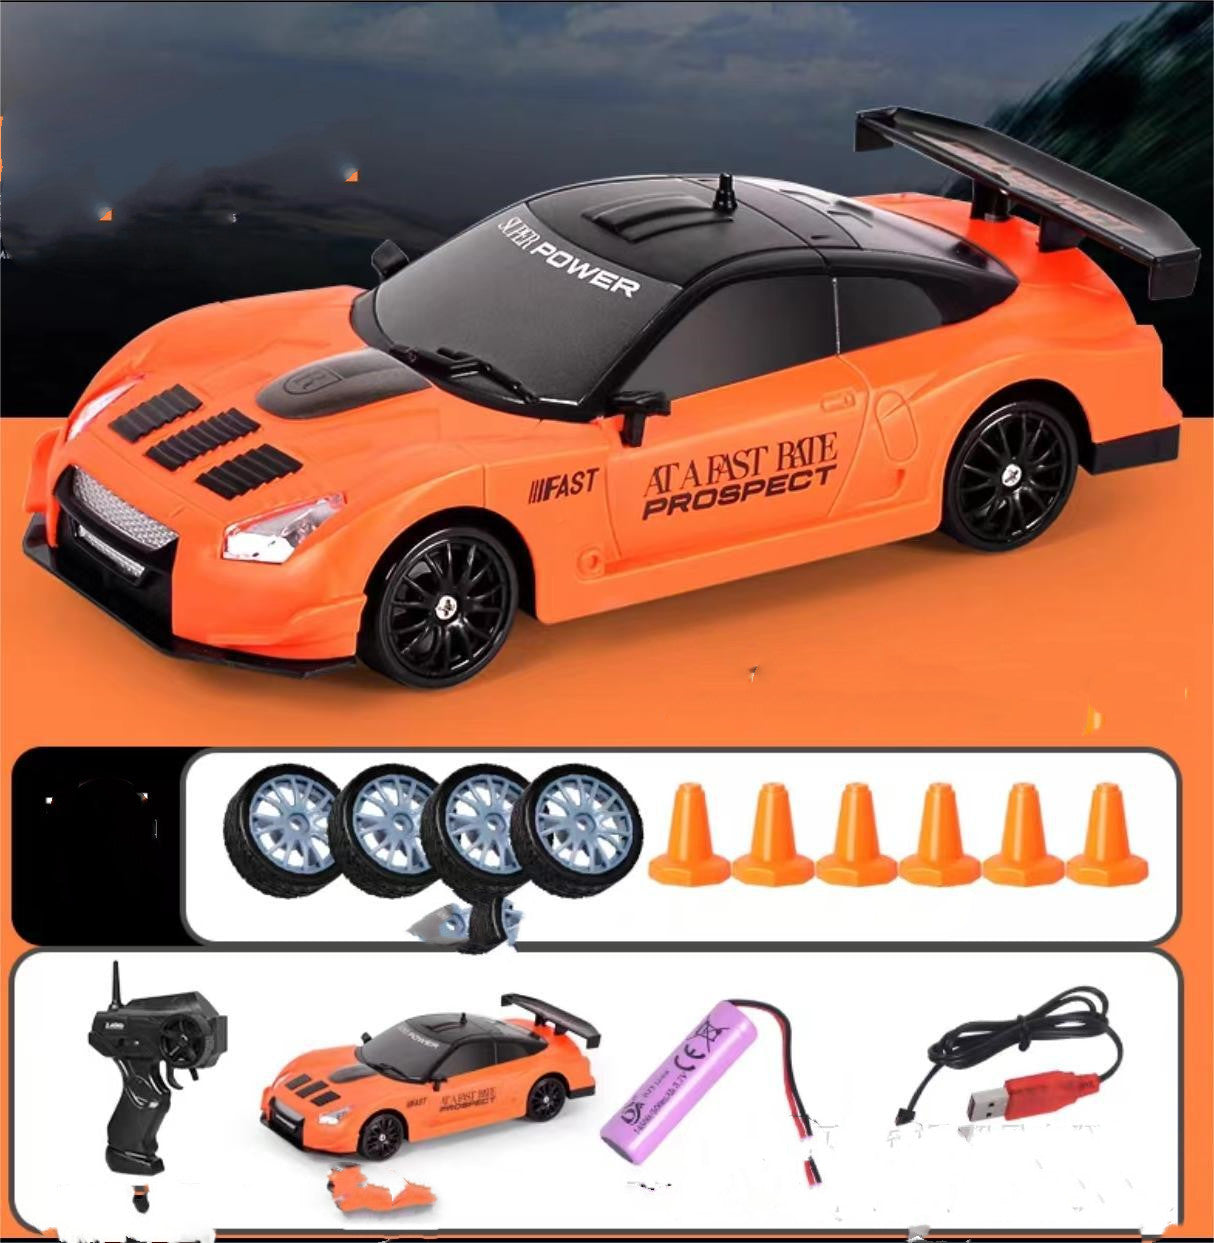 High-Speed 2.4G Remote Control Drift Racing Car Toy for Children - GTR Model AE86 Vehicle